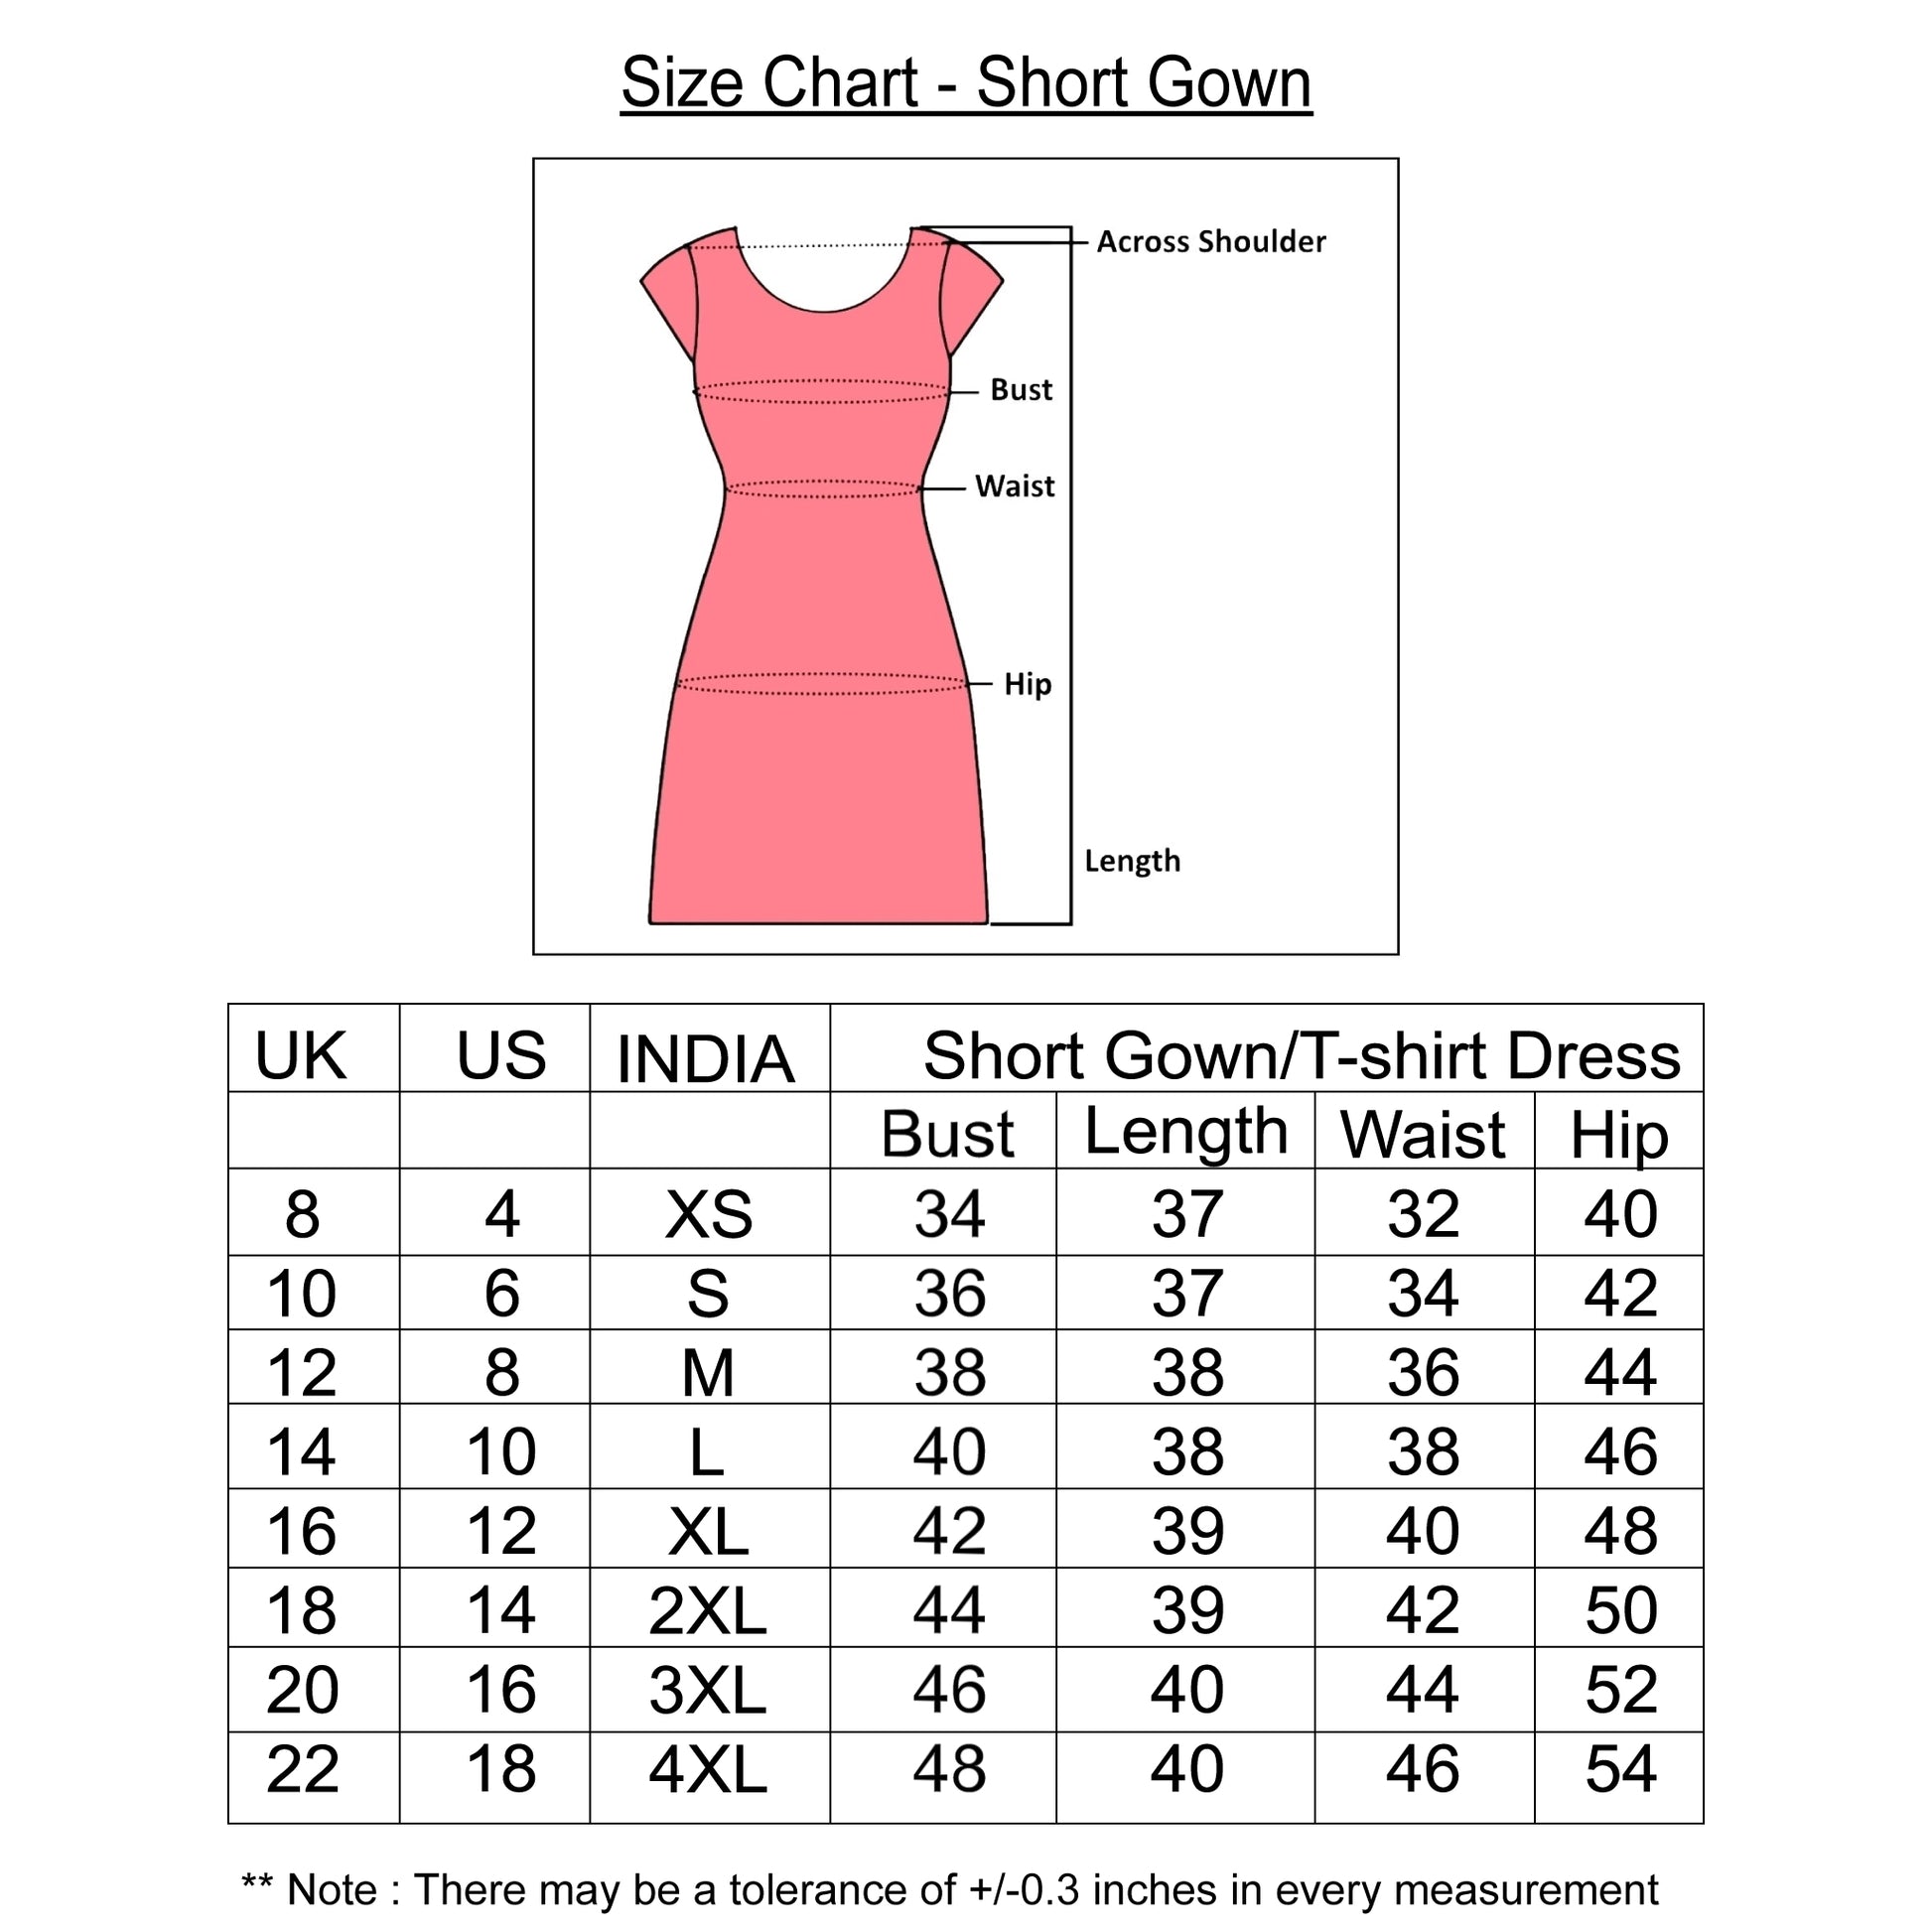 size chart of night short gown with measurements for small to 4xl sizes